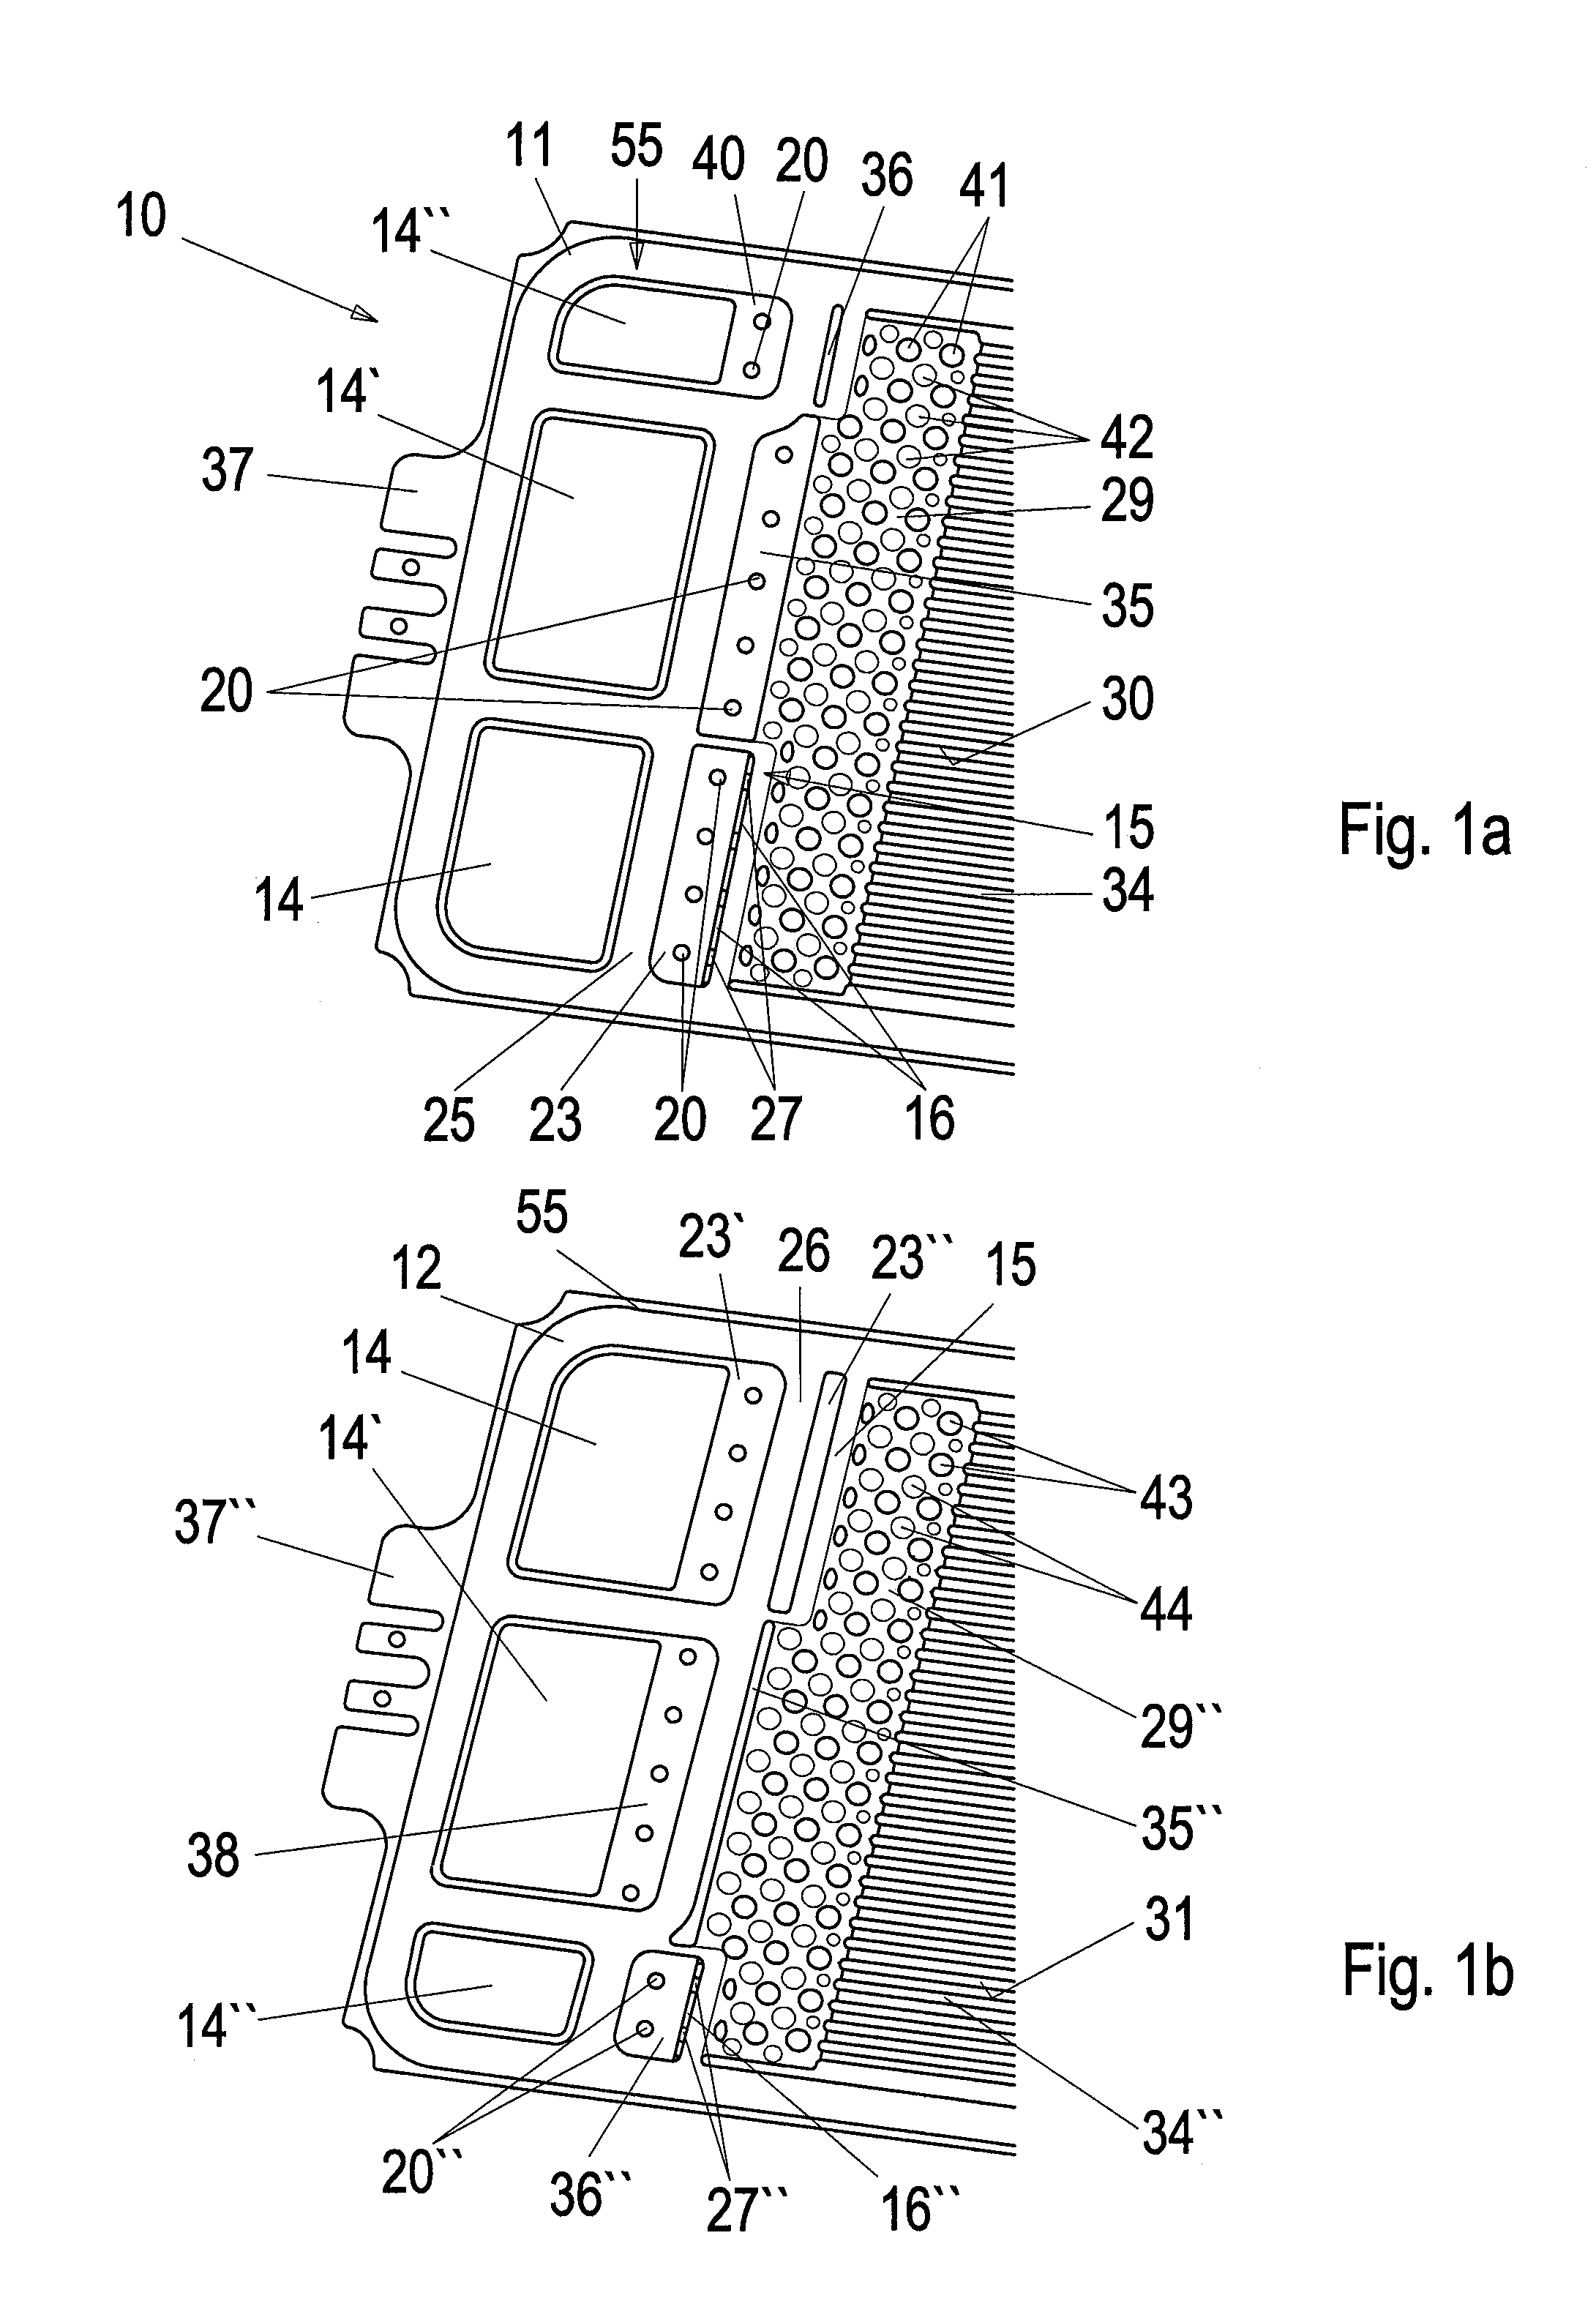 Bipolar Plate and Fuel Cell Unit